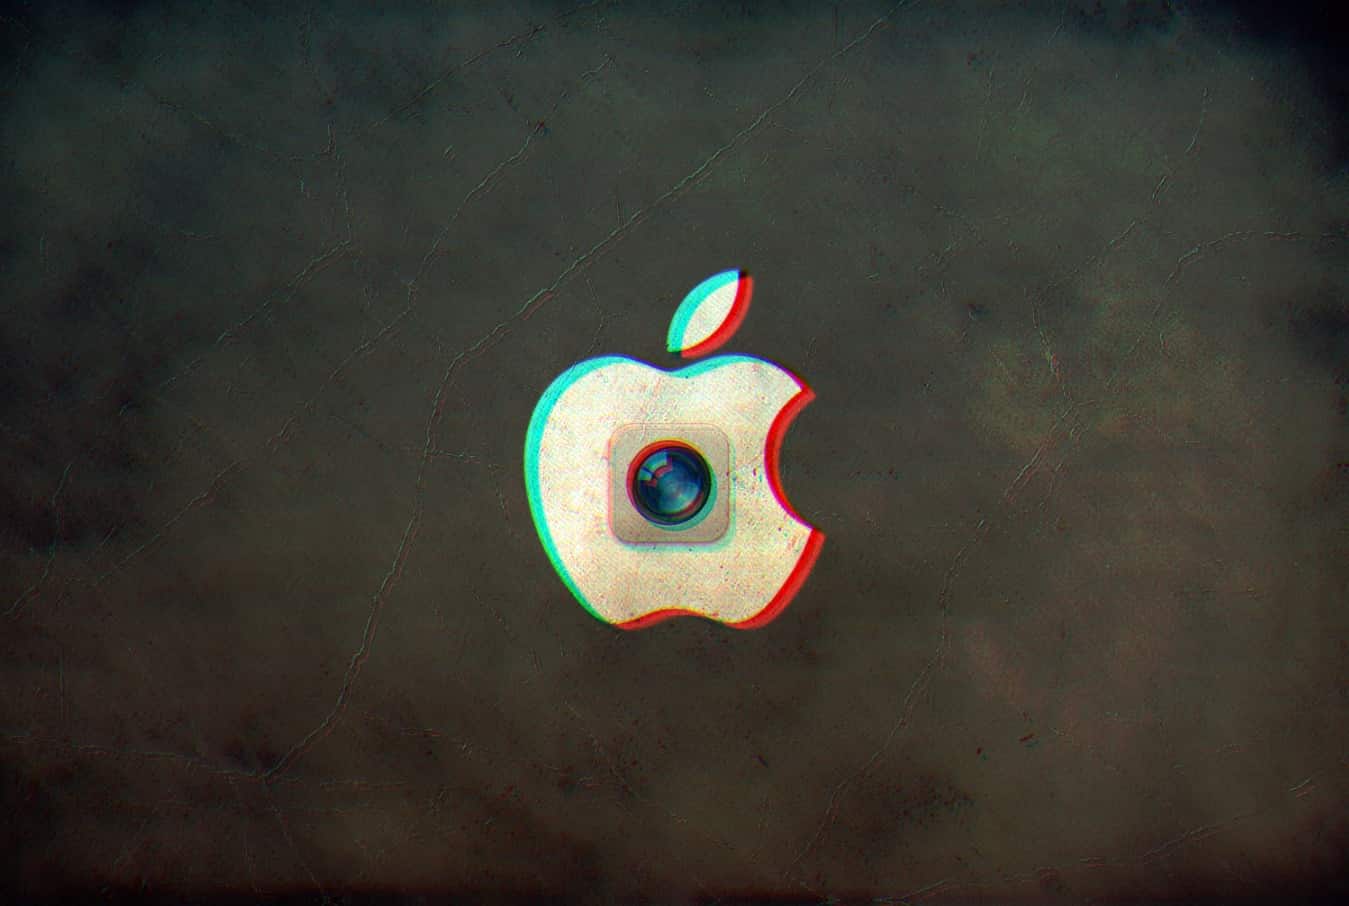 Bugs allowed hackers to hijack & activate Mac, iPhone cameras